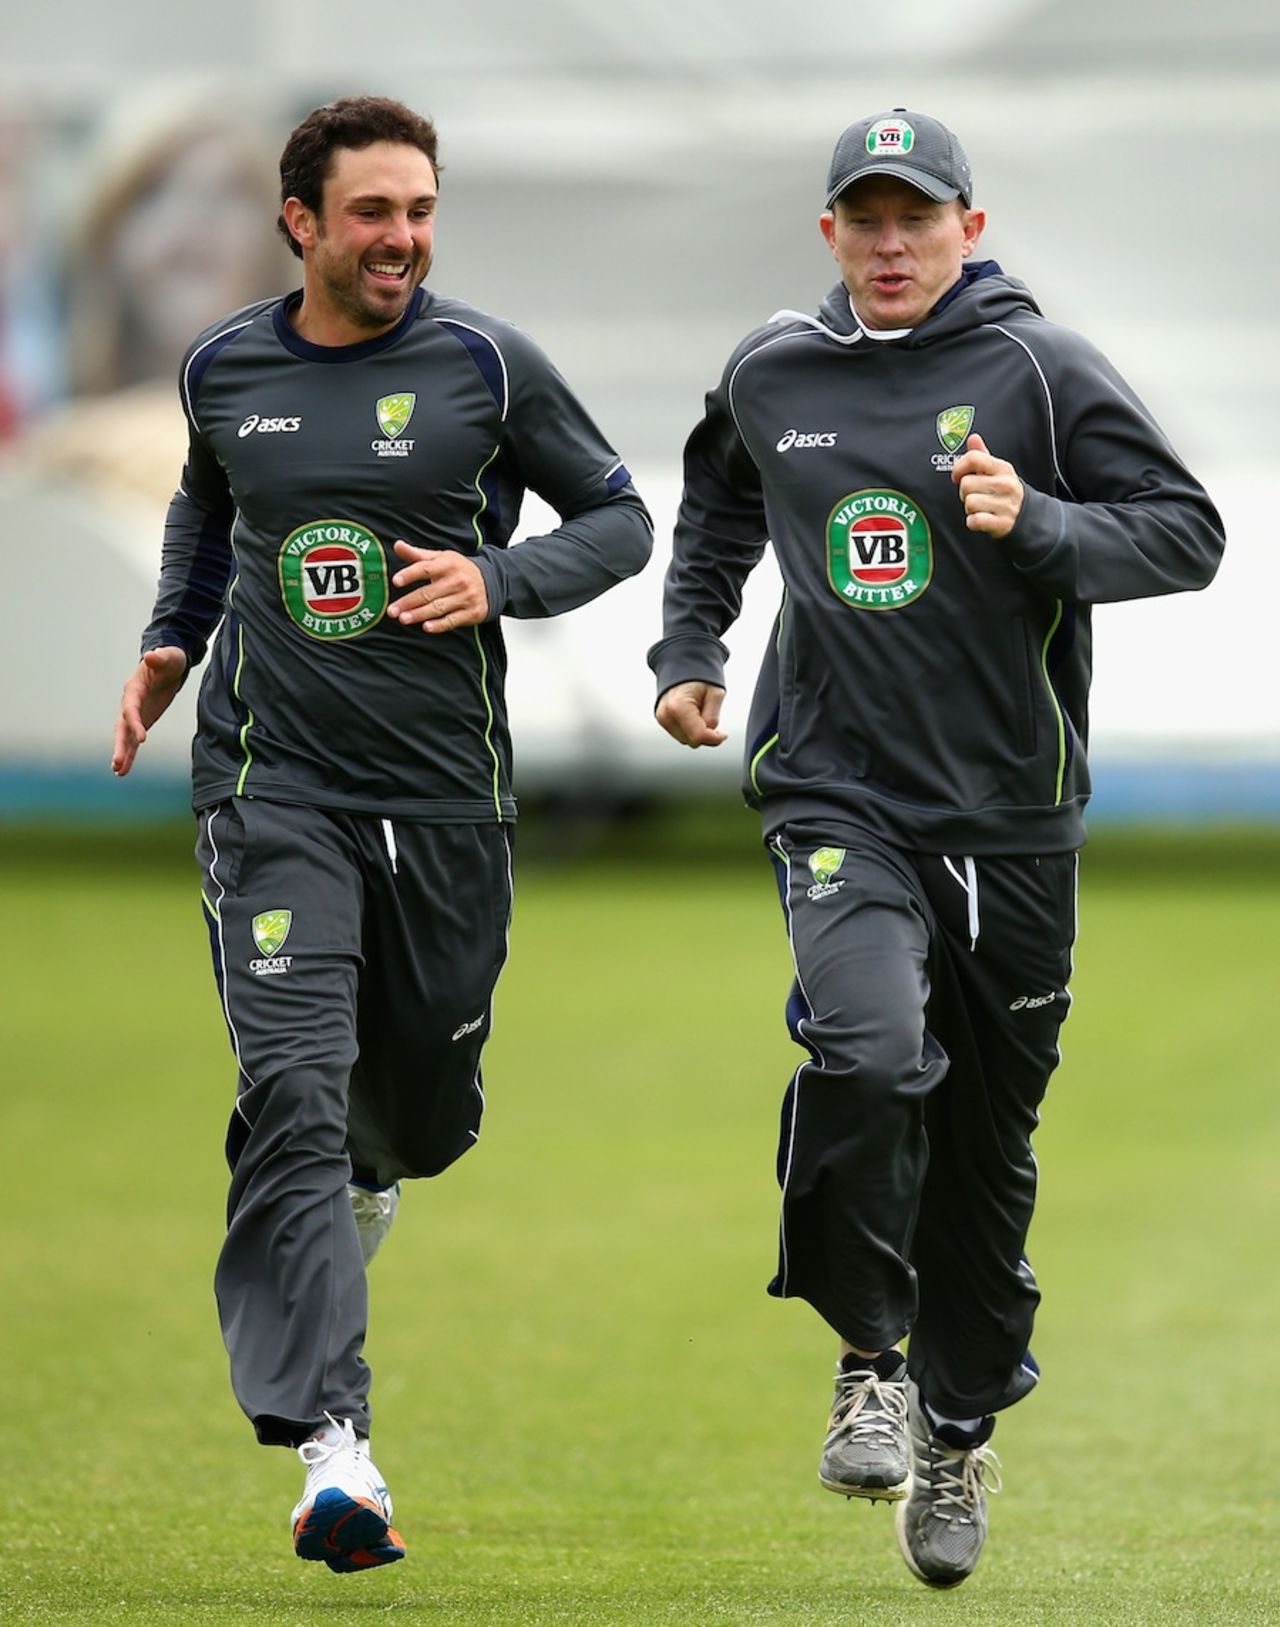 Ed Cowan and Chris Rogers during a training session, Worcester, July 1, 2013